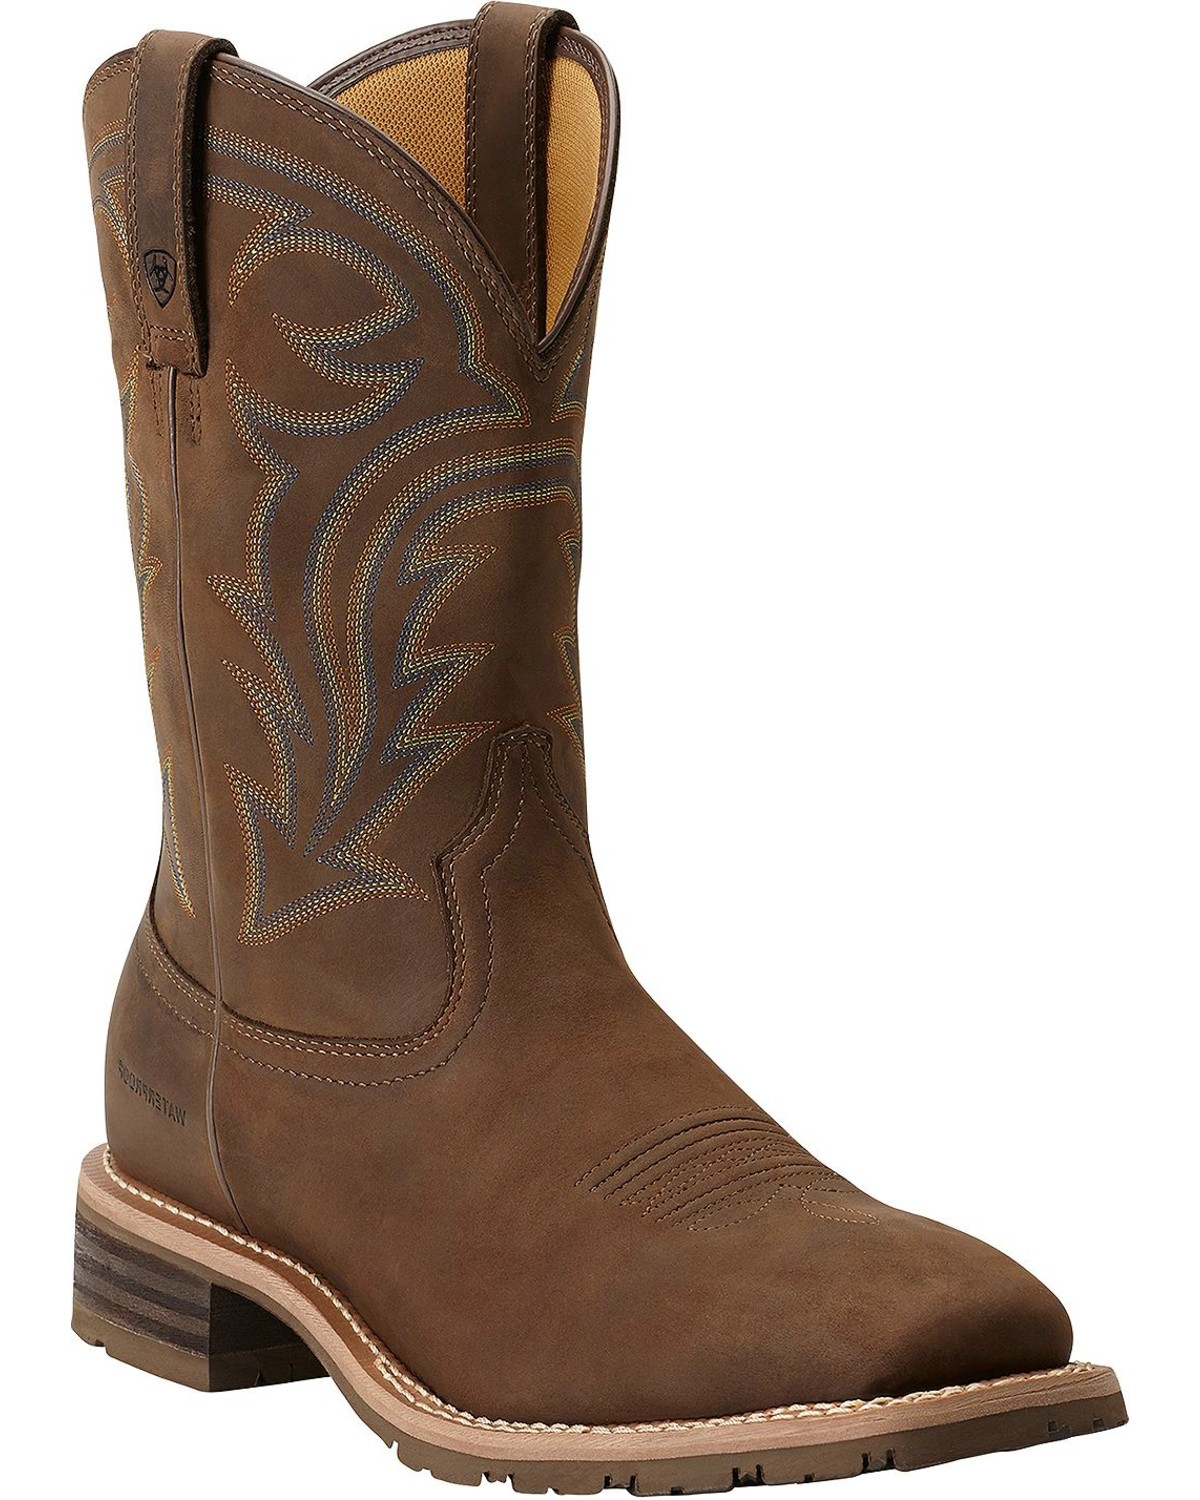 Ariat Hybrid Rancher Waterproof Pull On Work Boots - Square Toe